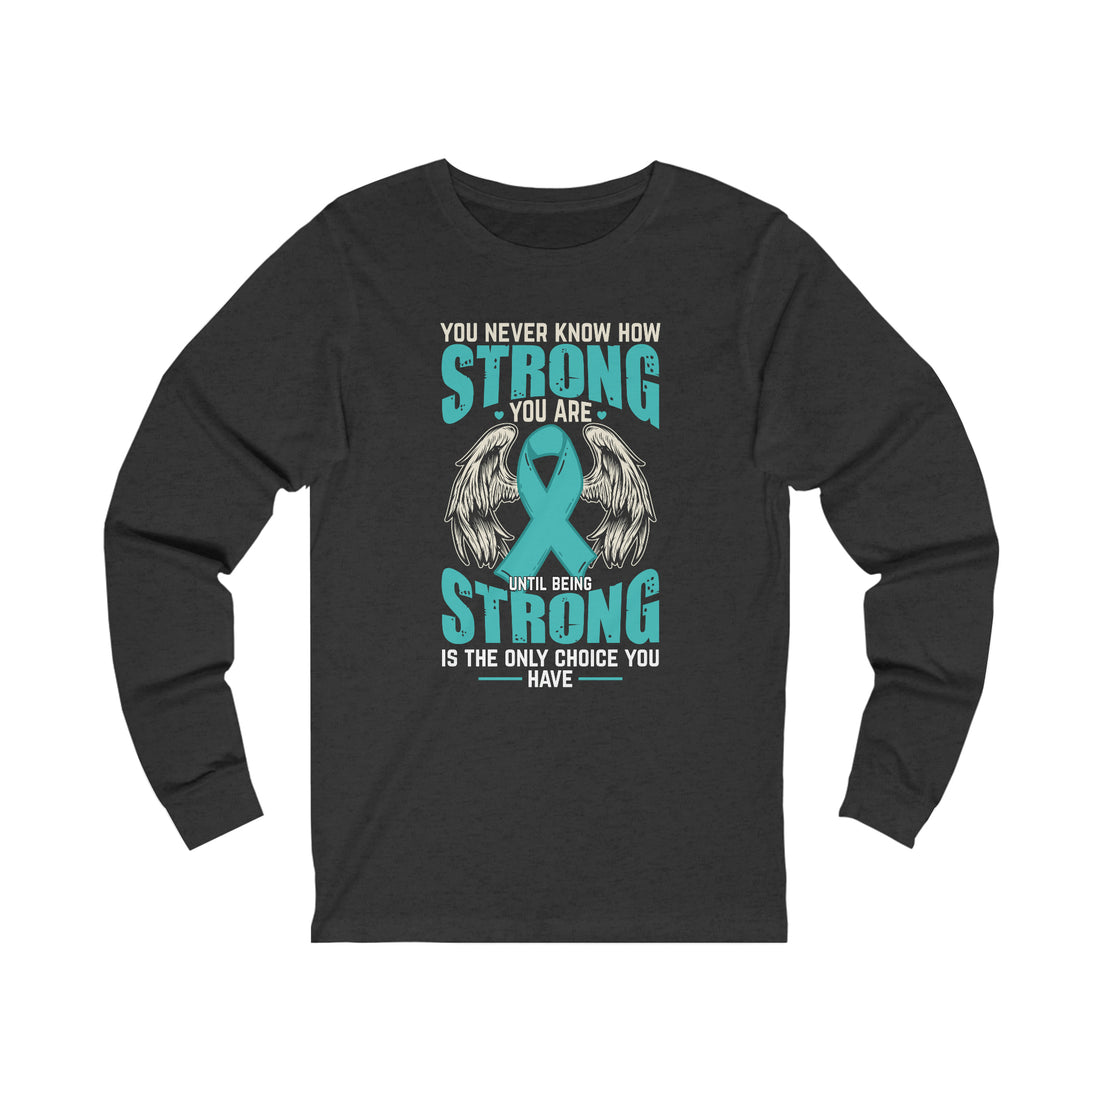 You Never Know How Strong You Are - Unisex Jersey Long Sleeve Tee